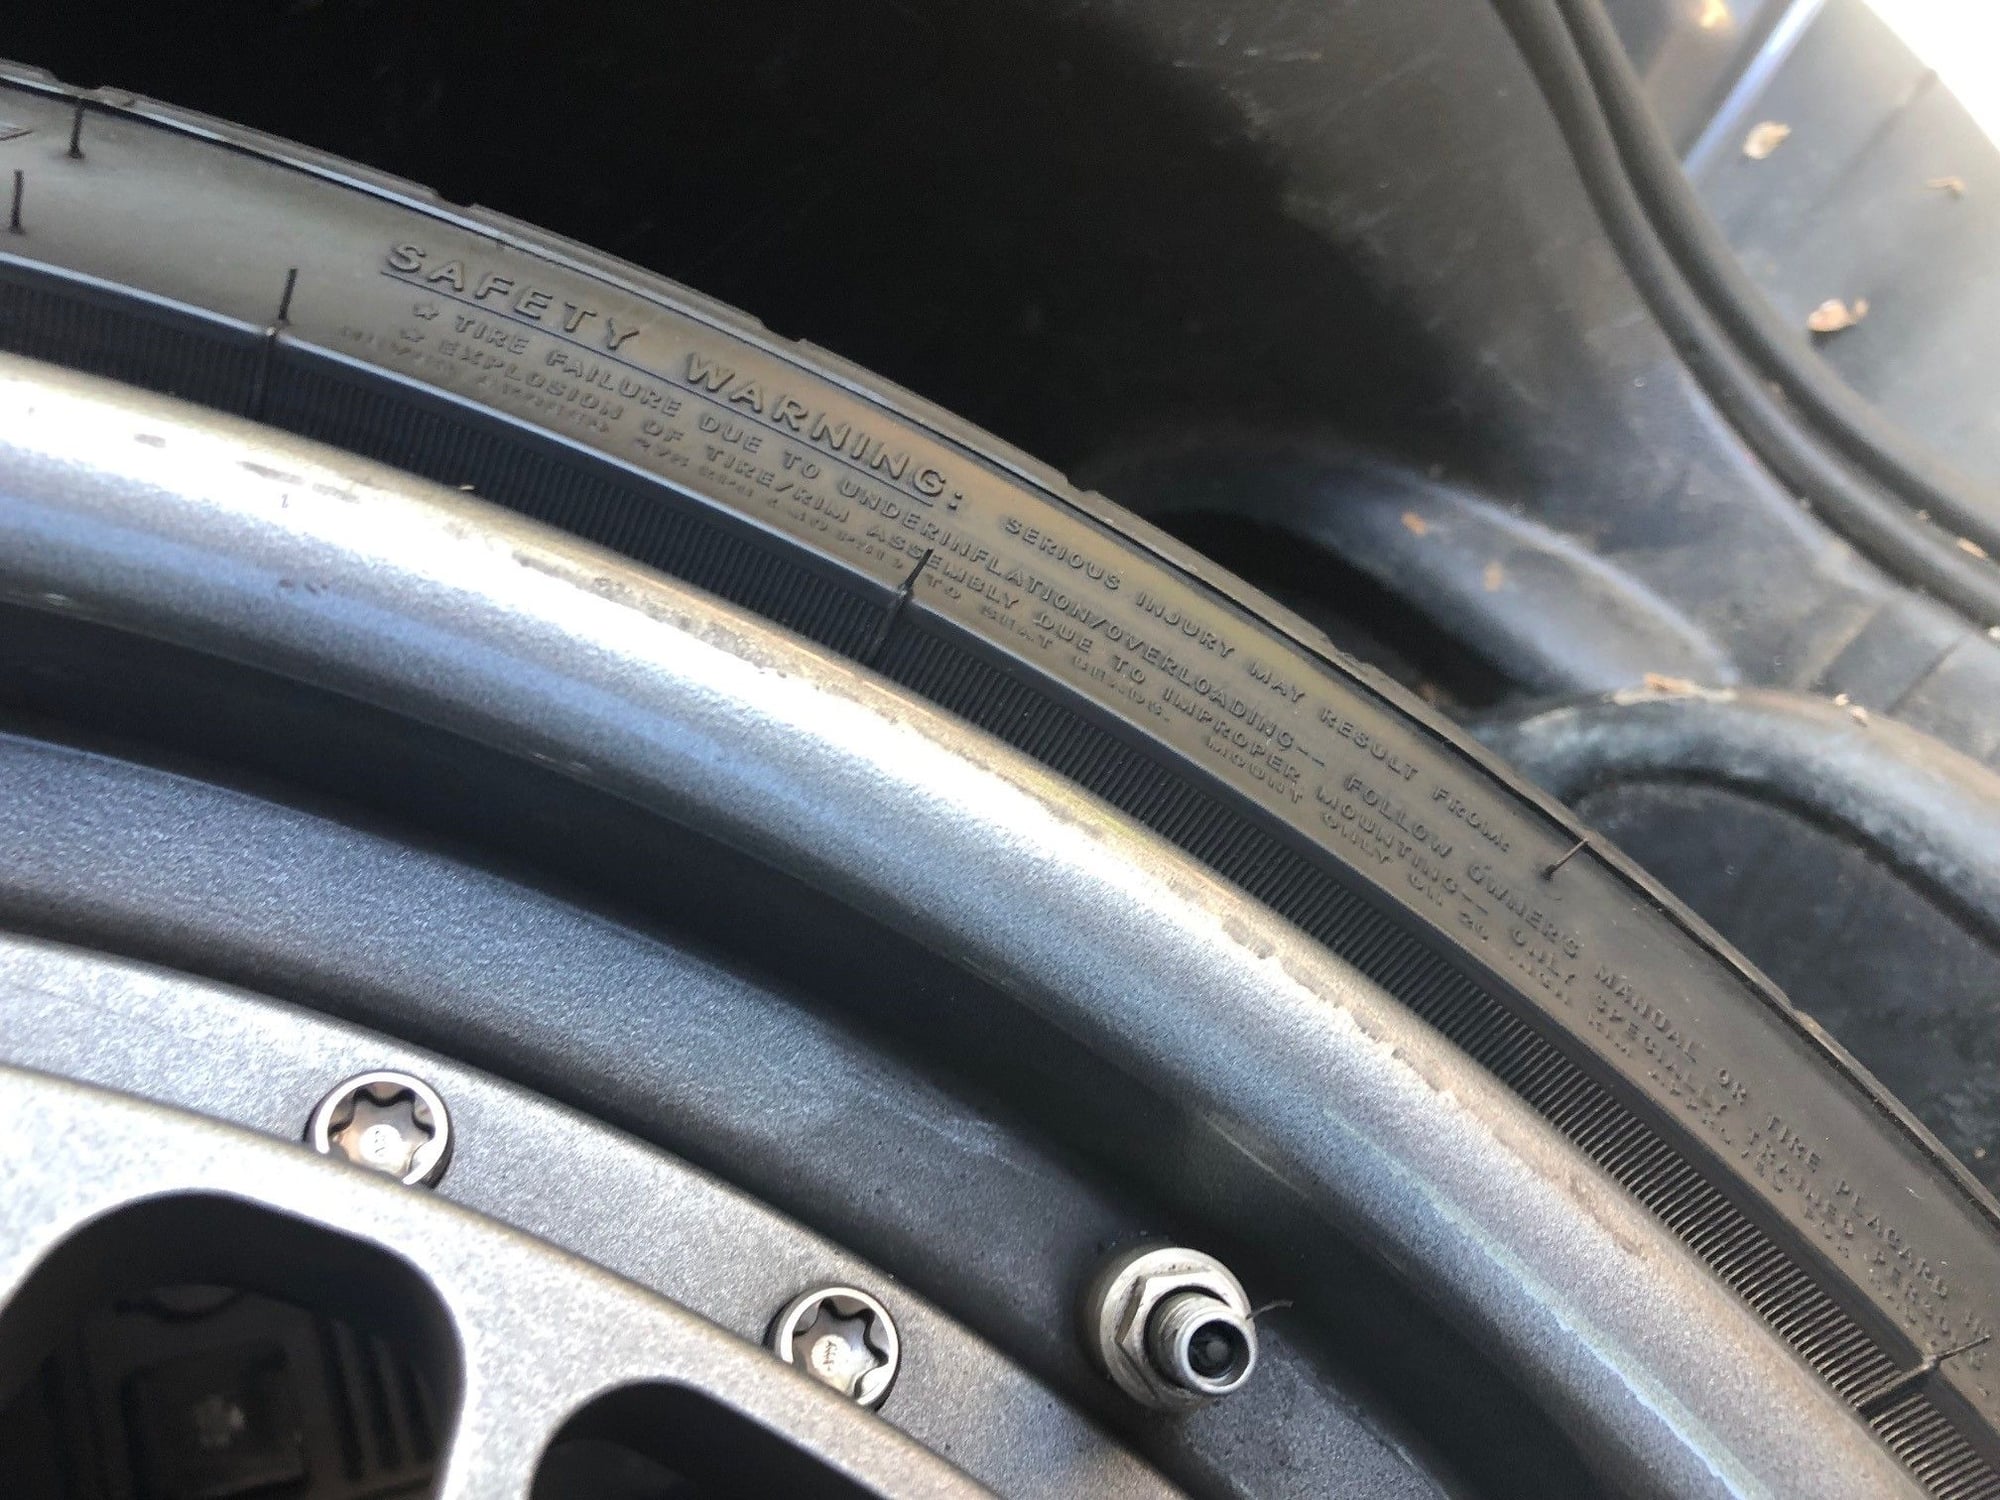 Wheels and Tires/Axles - HRE 300 Classic wheels - 981 Cayman - Used - 2014 to 2019 Porsche Cayman - Bloomington, MN 55438, United States